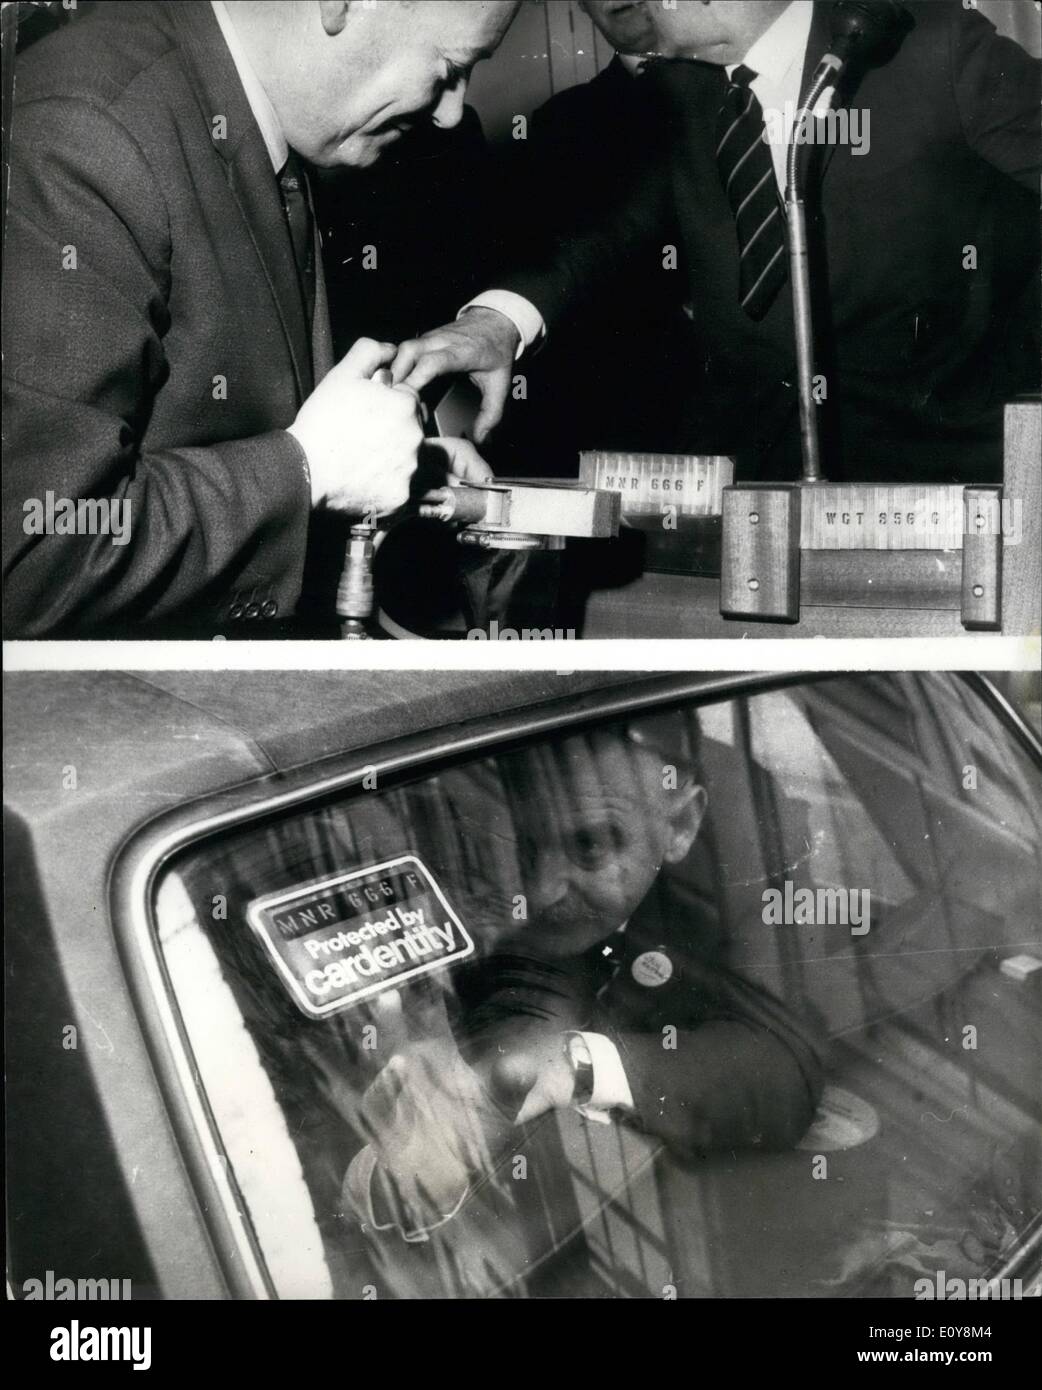 Feb. 02, 1969 - New method of preventing car theft. Cardentity an entirely new method of preventing the theft and resale of motor vehicles , was demonstrated today at the Savoy Hotel The Cardentity method protects vehicles by engraving the registration number on the four side and rear windows. The only way by which the registration number an then be removed is by replacing each window. Cardentity will be available at leading garages throughout the U.K. Engraving the windows takes only 10/15 minutes and requires no special skill. The cost is 3 Stock Photo